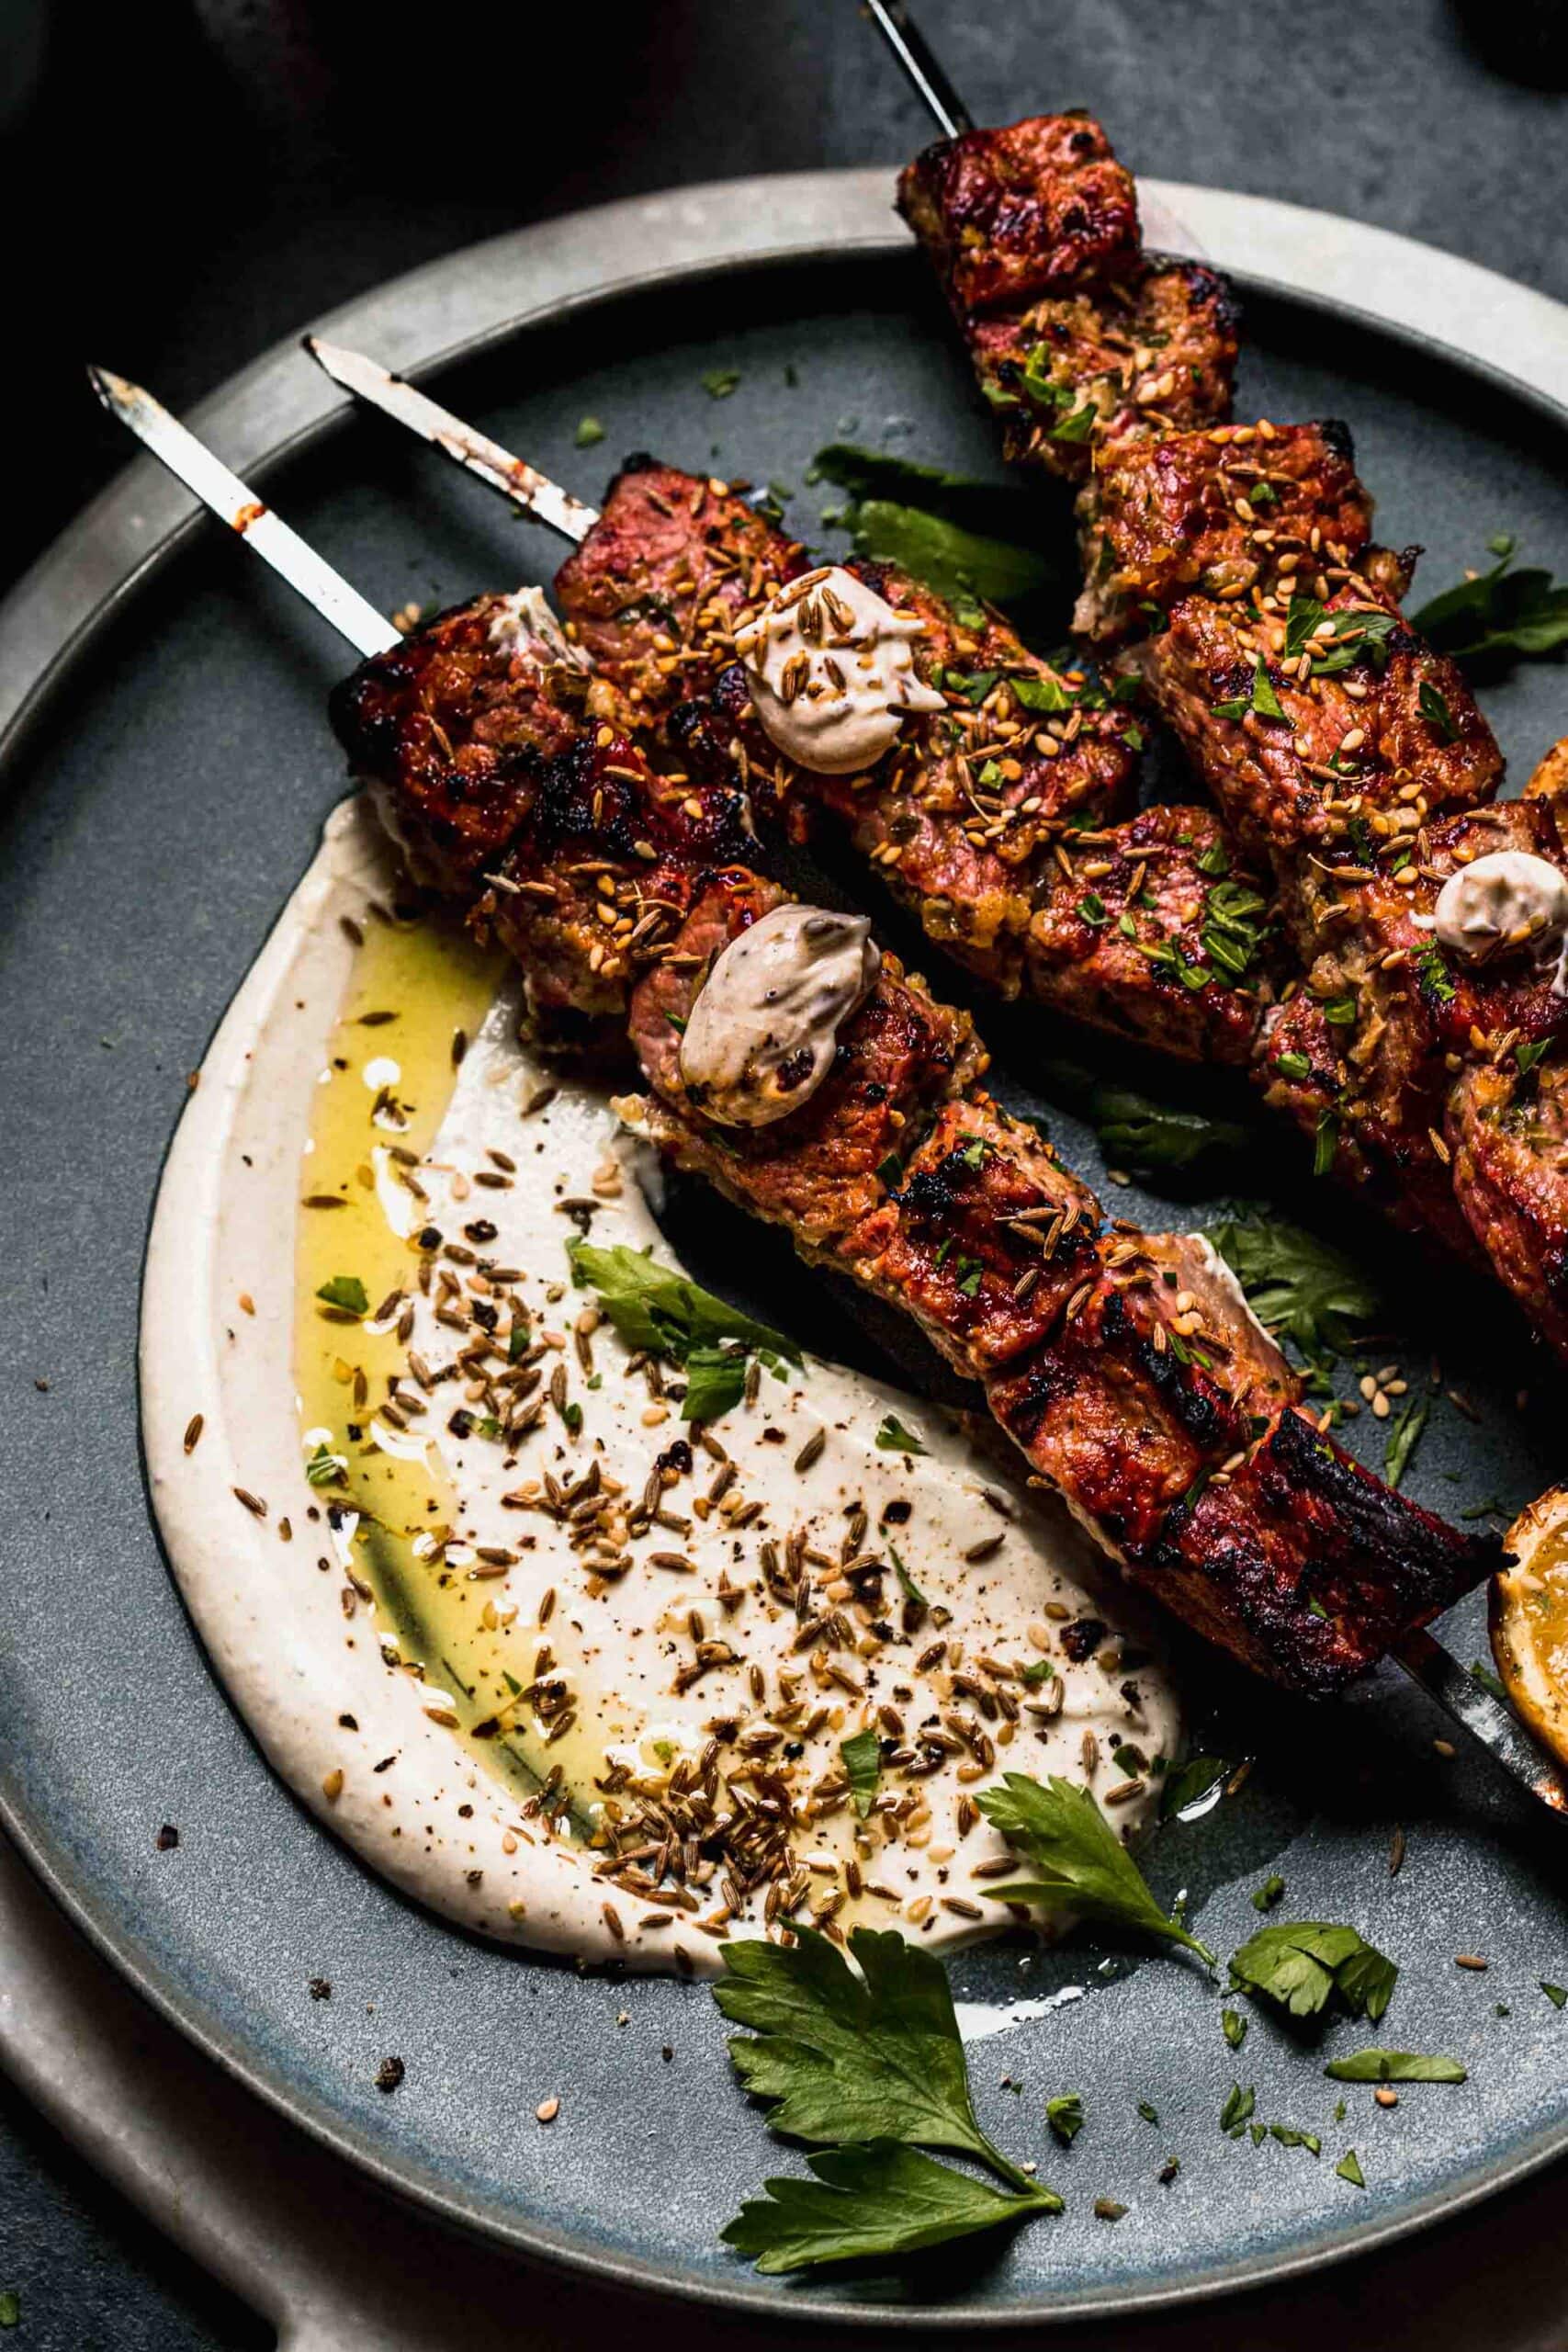 Overhead shot of lamb kebabs on plate with dollop of sesame sauce and grilled lemon.